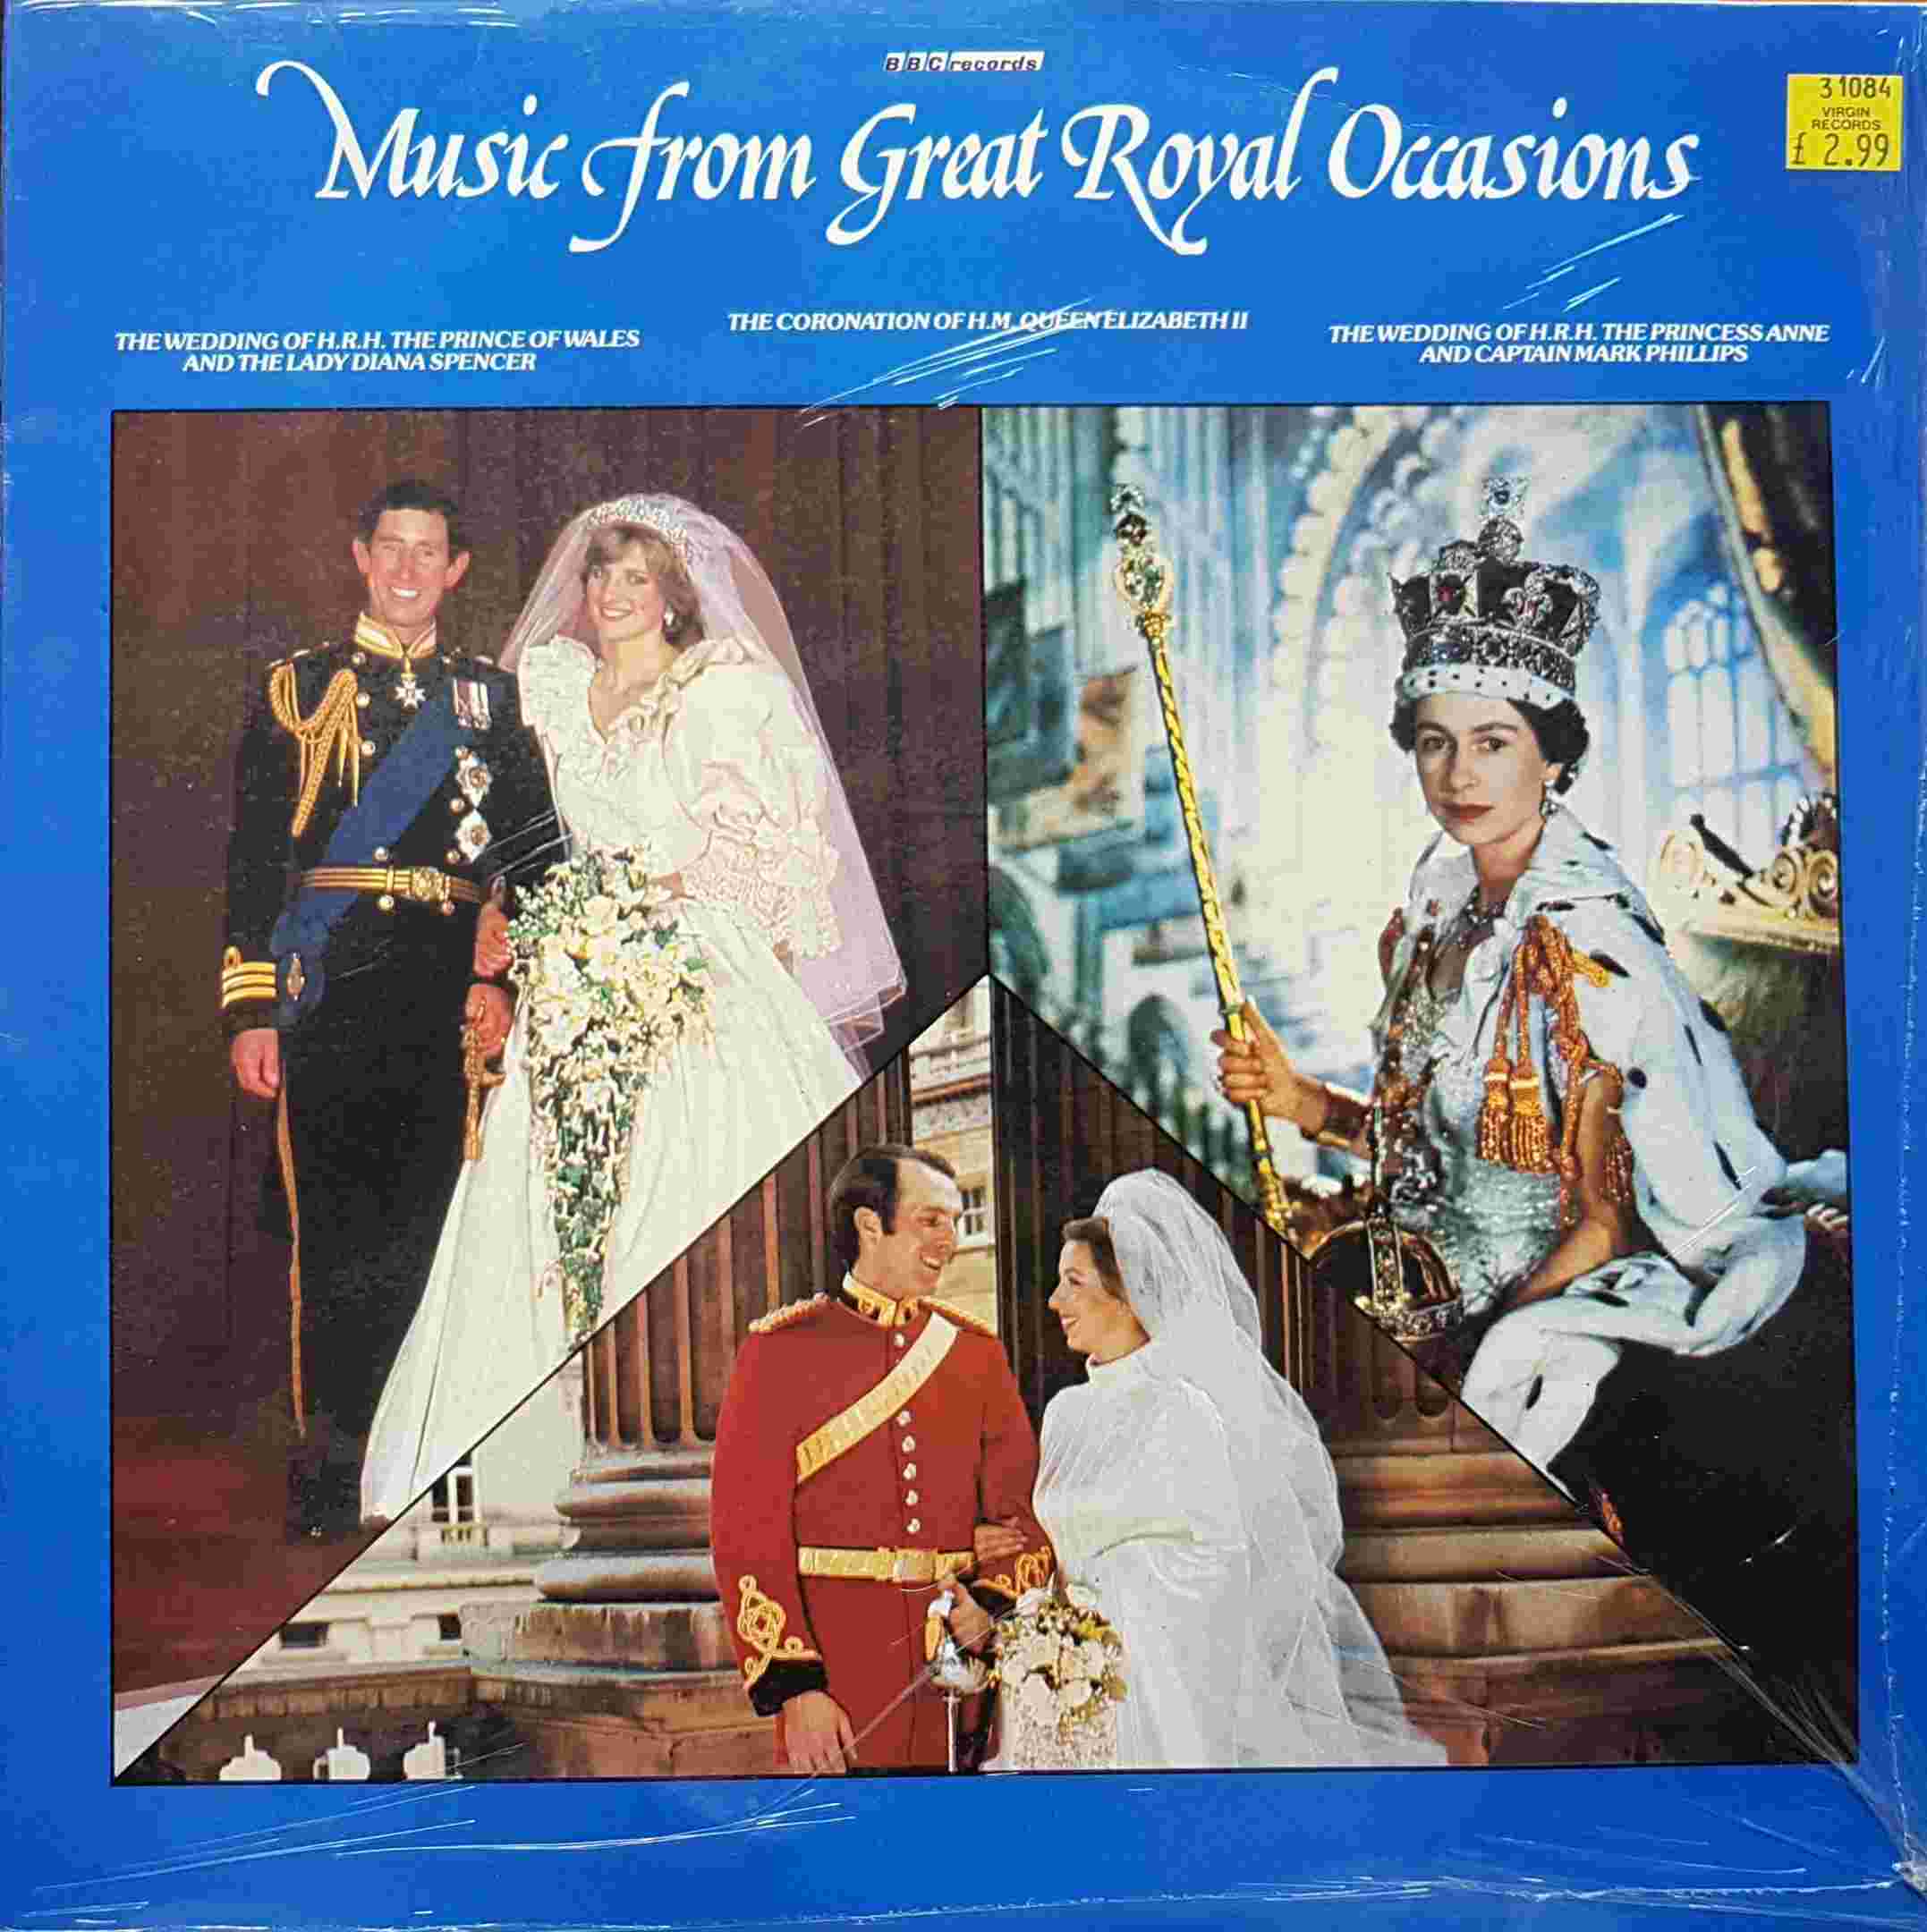 Picture of REC 470 Music from great royal occasions by artist Various from the BBC albums - Records and Tapes library